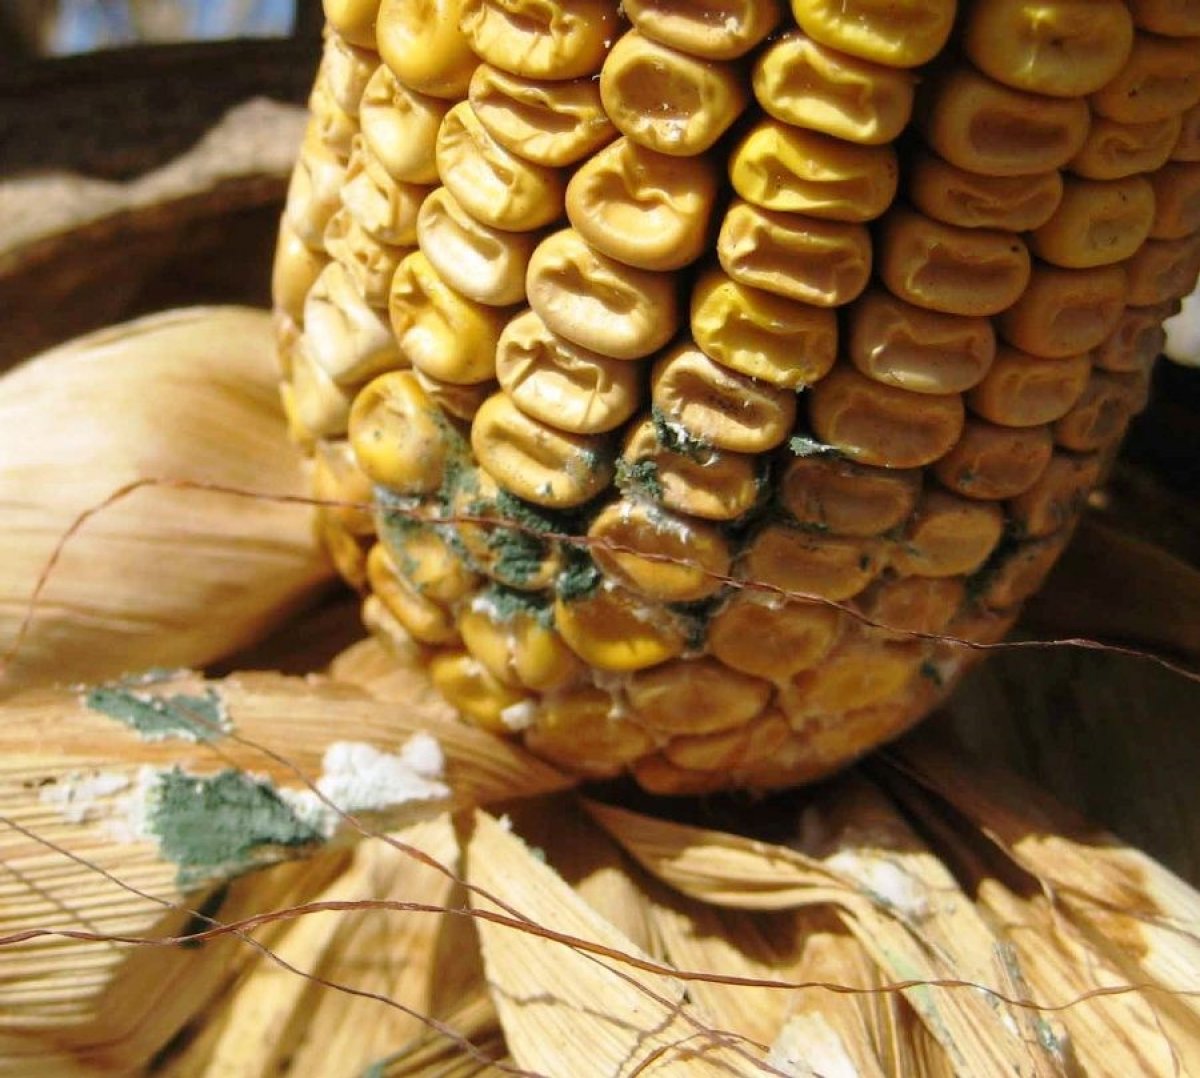 What are mycotoxins #1